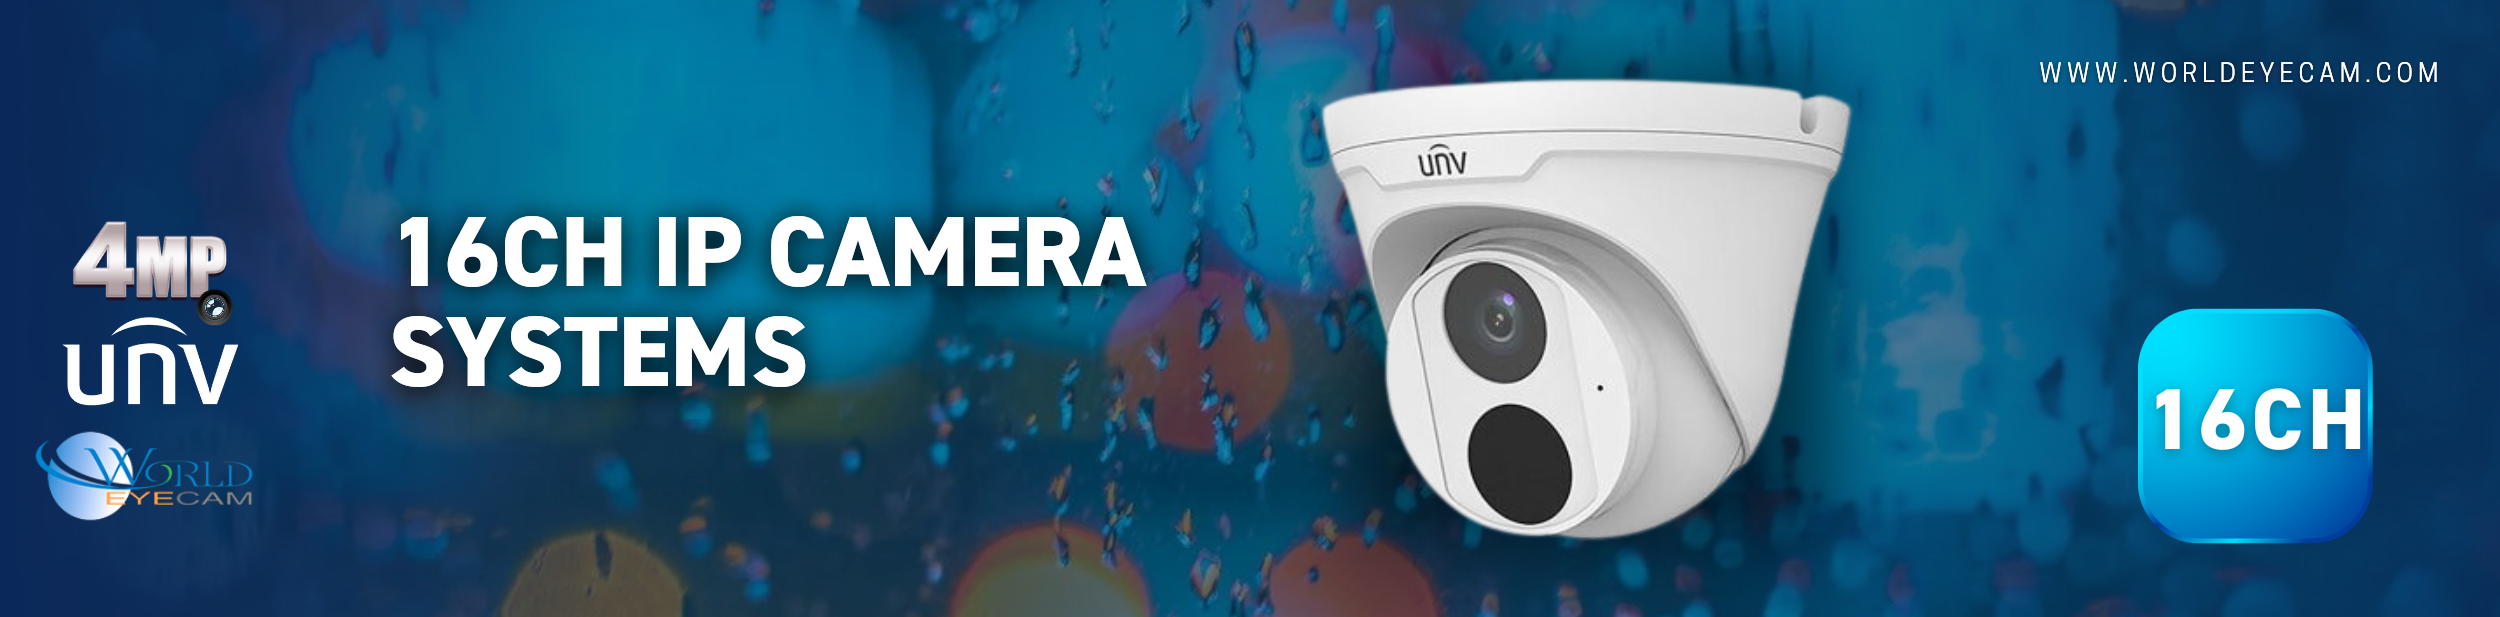 IP Camera Systems - 16ch Uniview